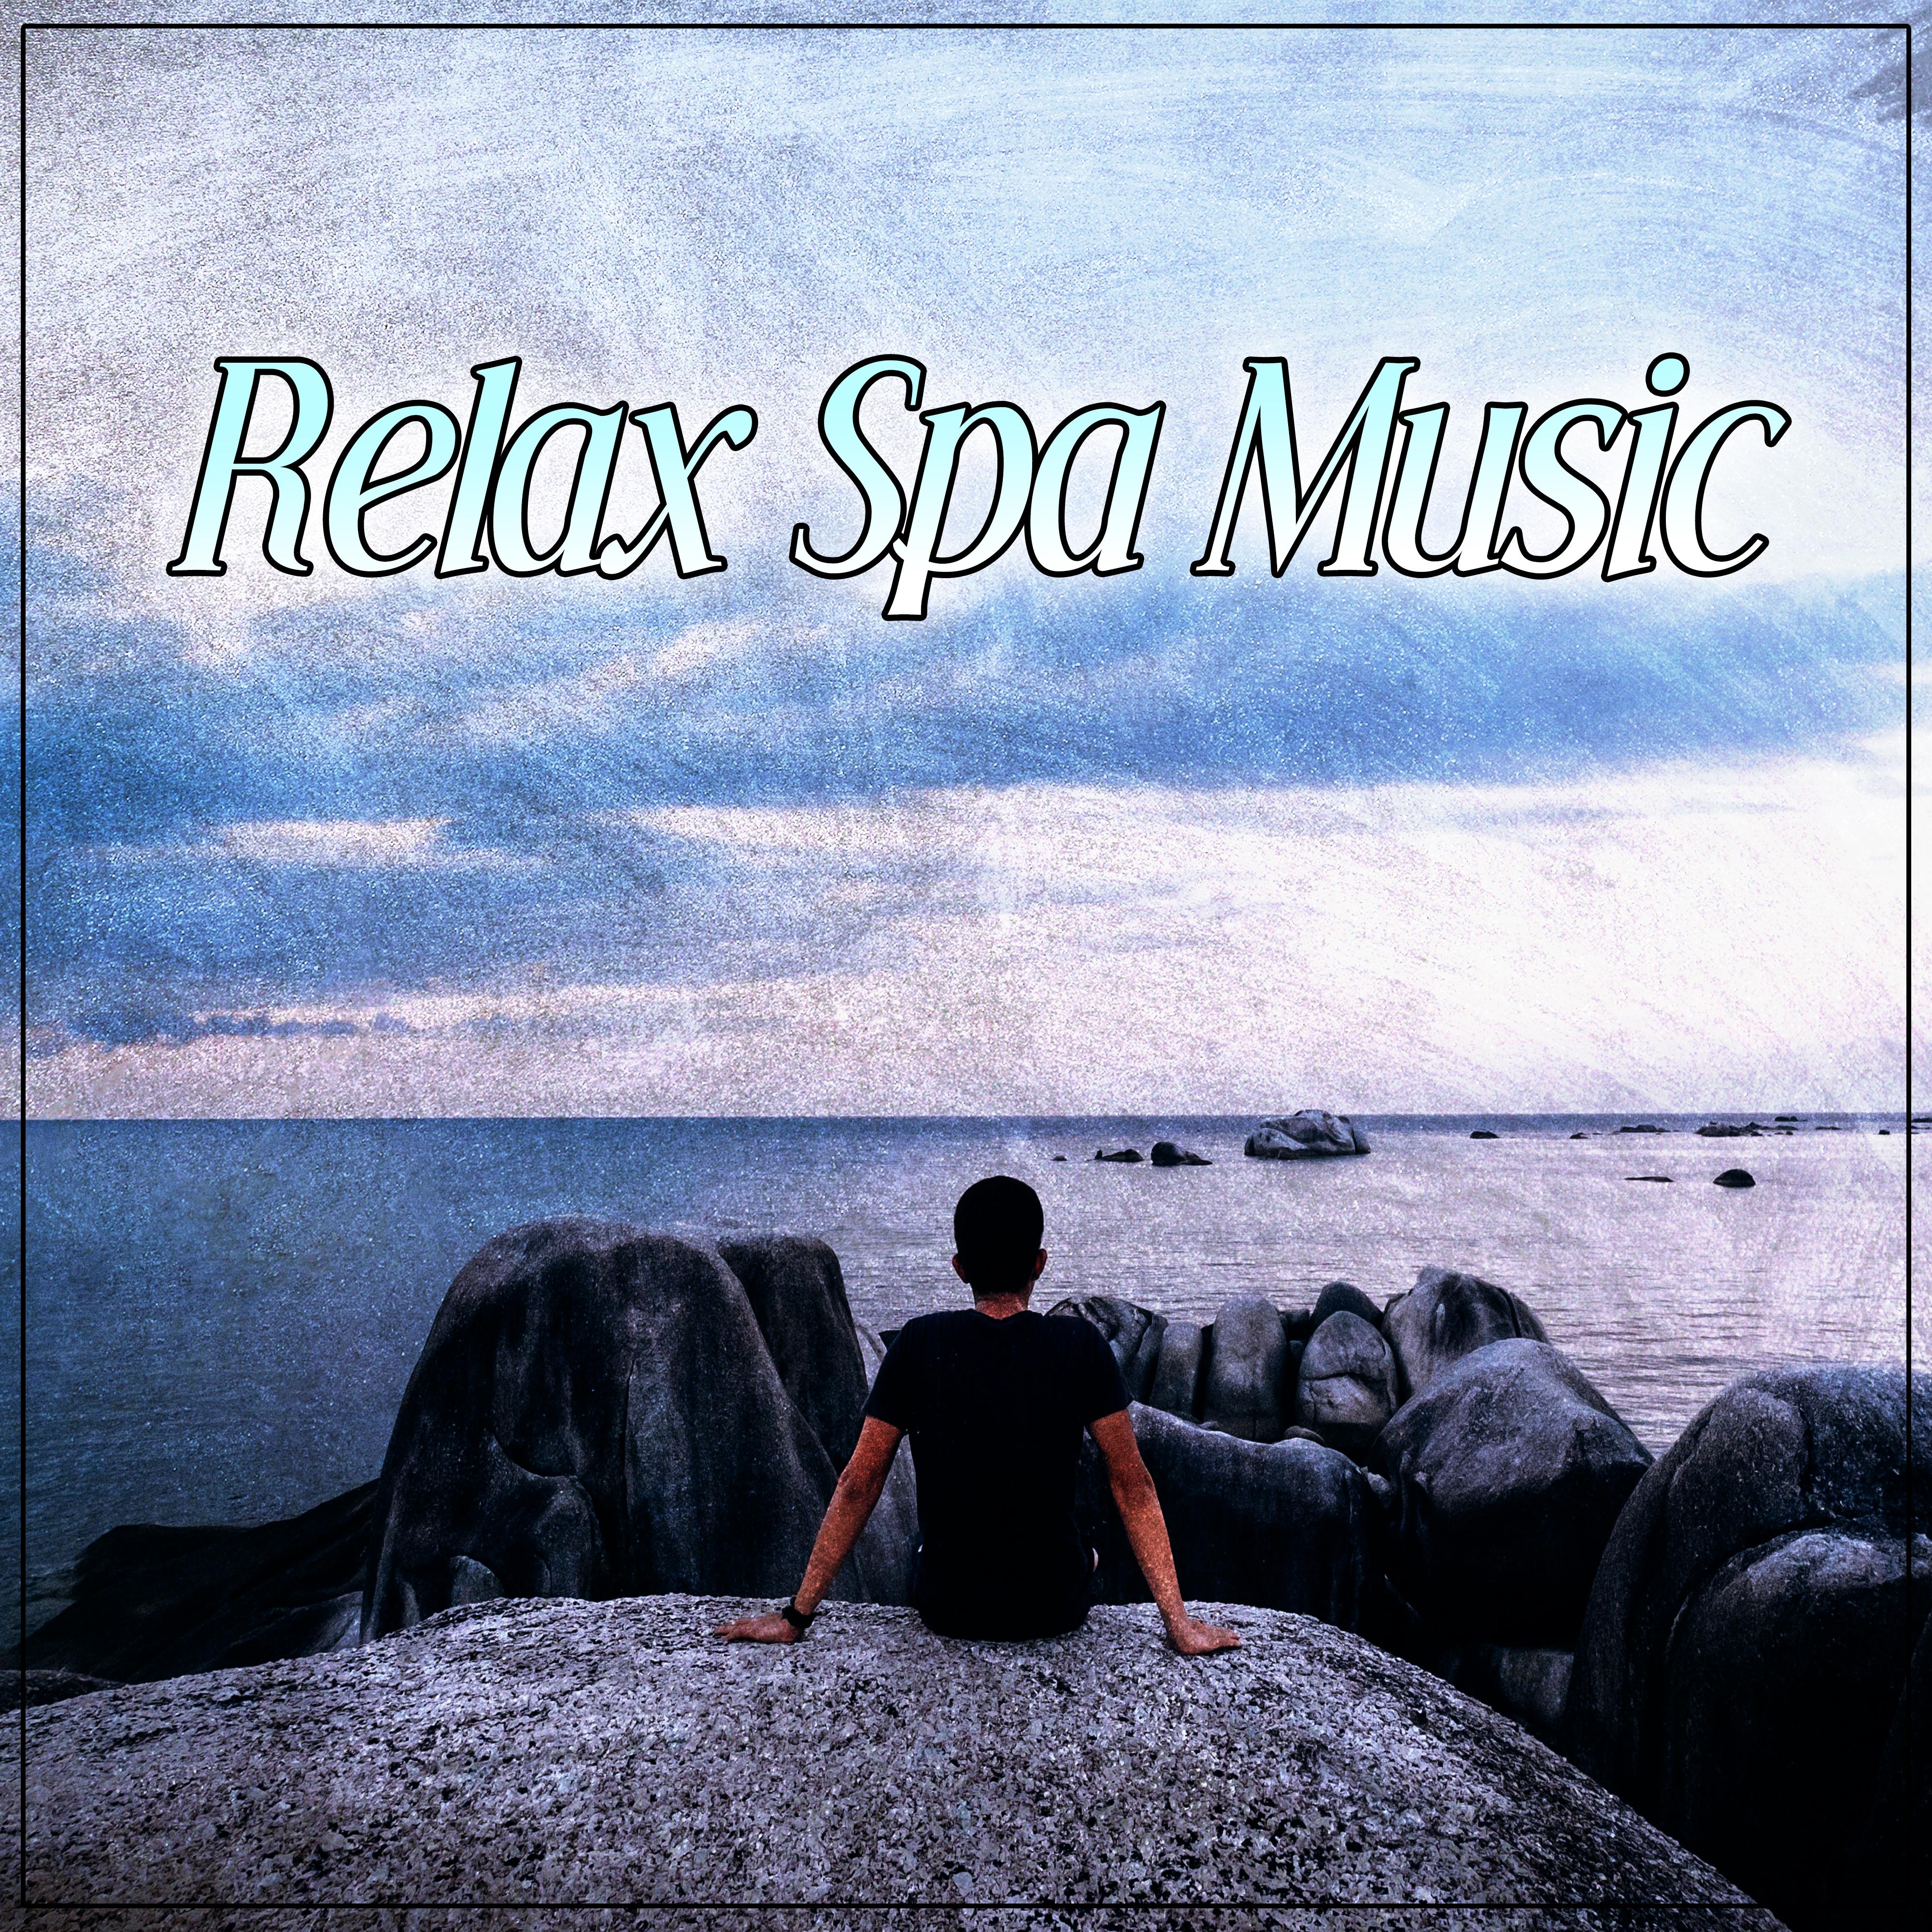 Relax Spa Music  Calmness Sounds of Nature to Wellness, Spa, Bath Time, Pure Relaxation, Massage Therapy, Nature Sounds